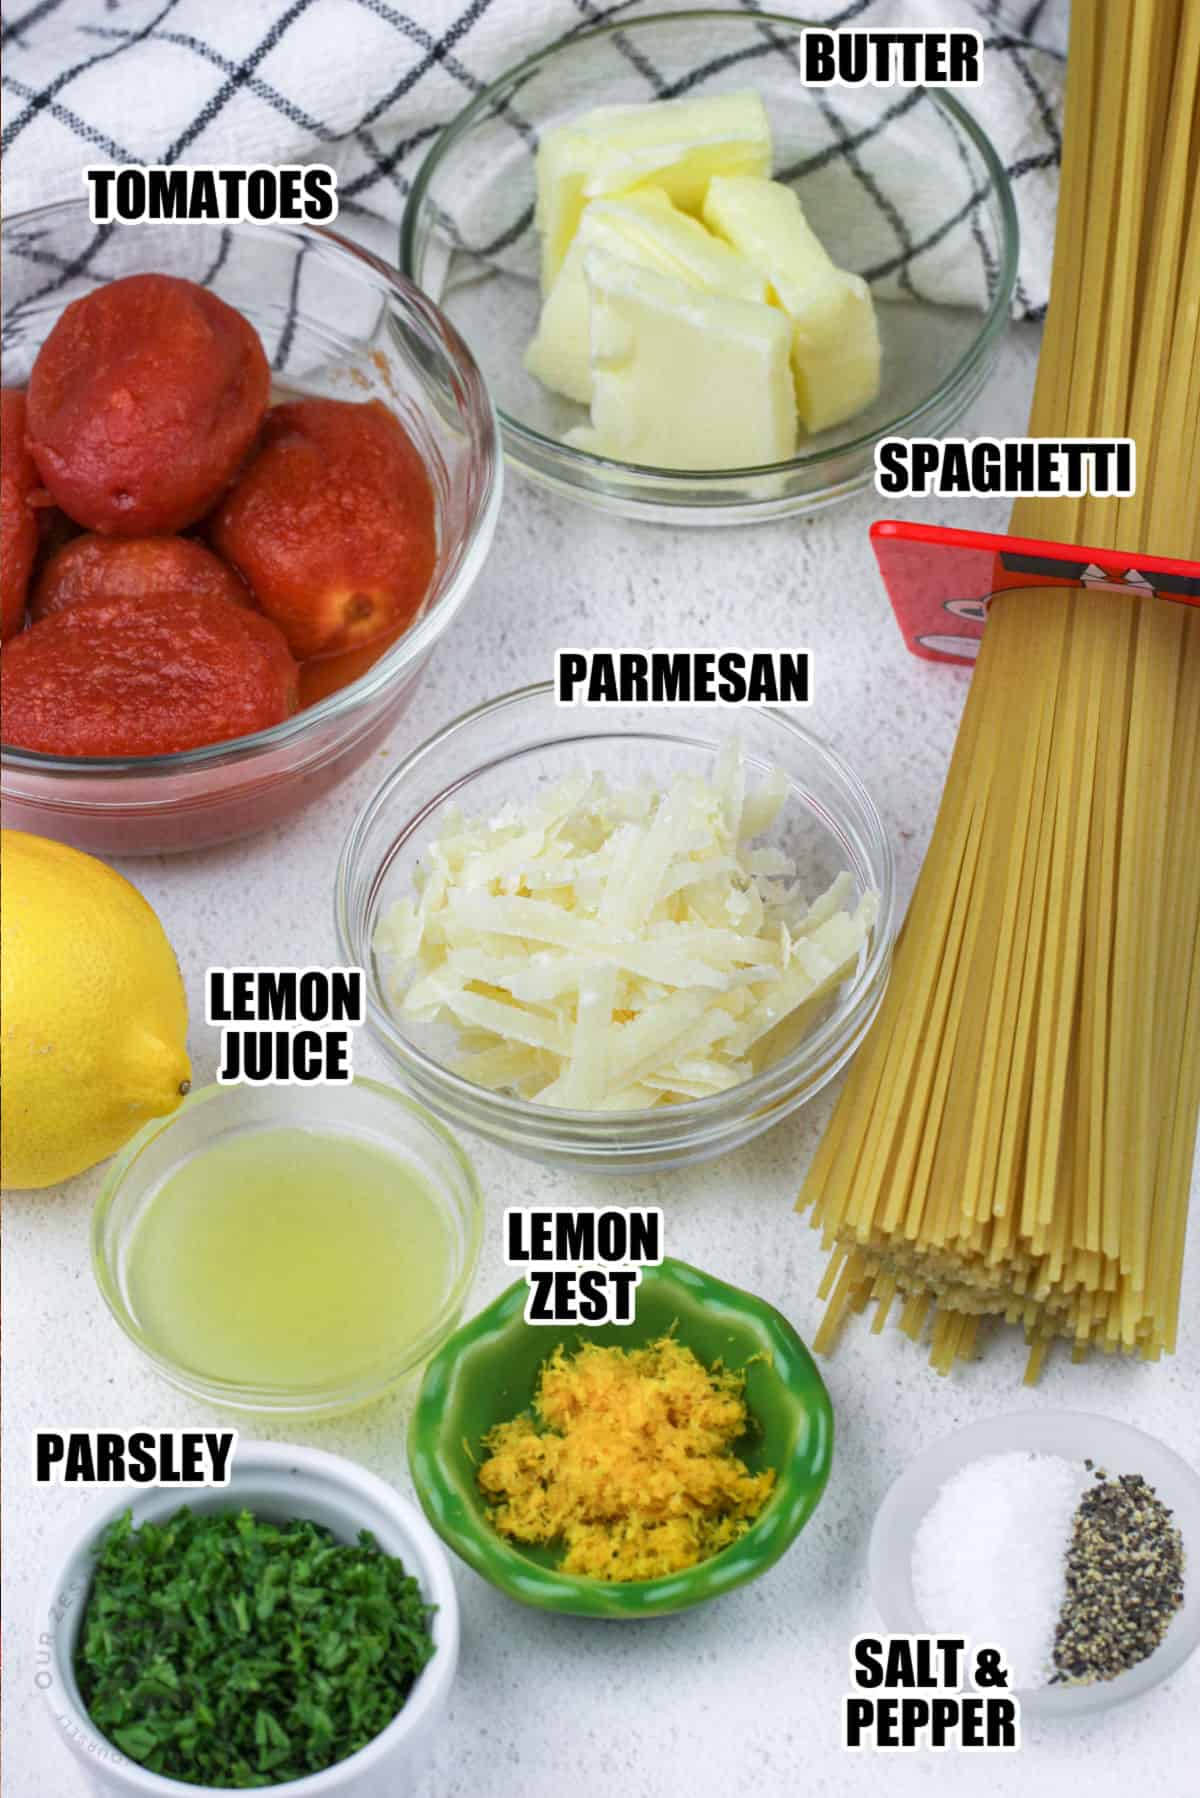 butter , tomatoes , parmesan , spaghetti , lemon juice , lemon zest , parsley and salt and pepper with labels to make Simple Tomato Lemon Pasta